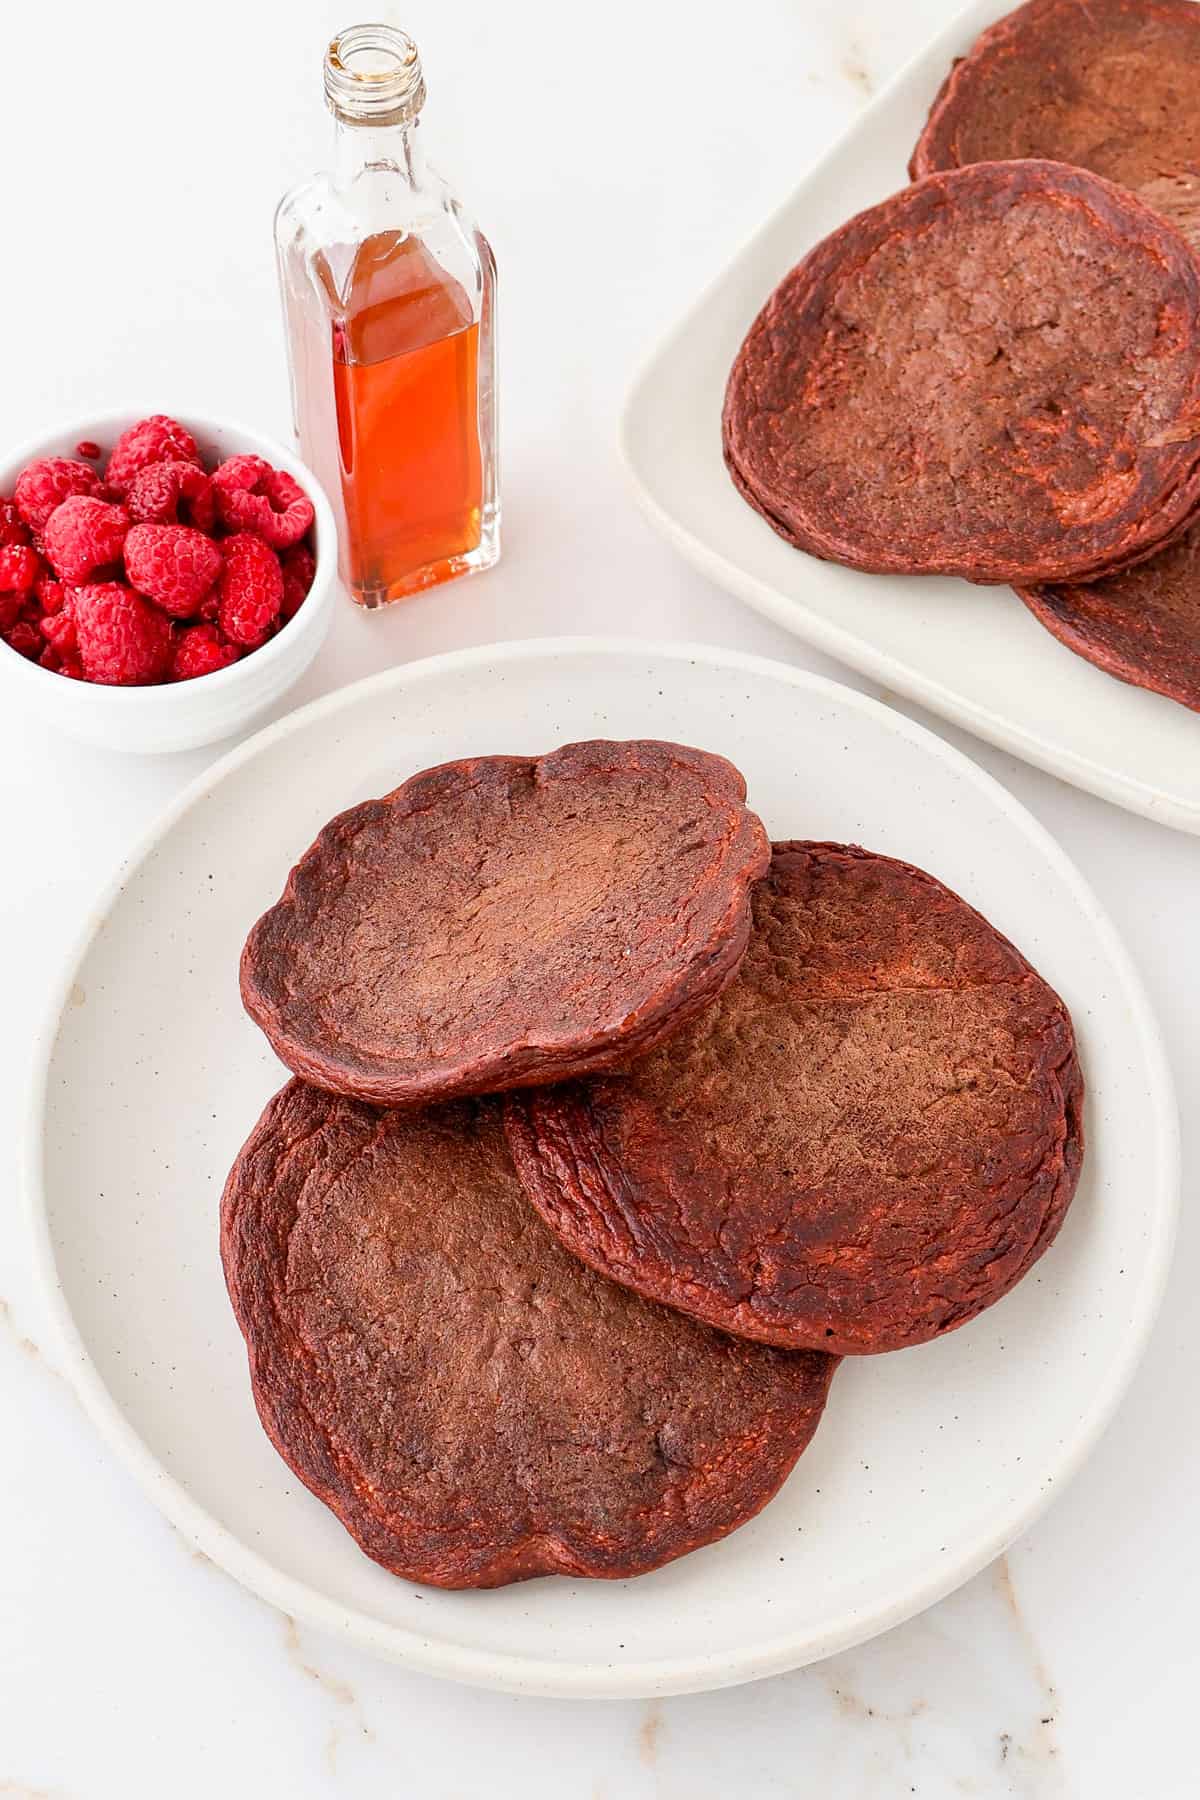 Chocolate pancakes on a plate and platter.